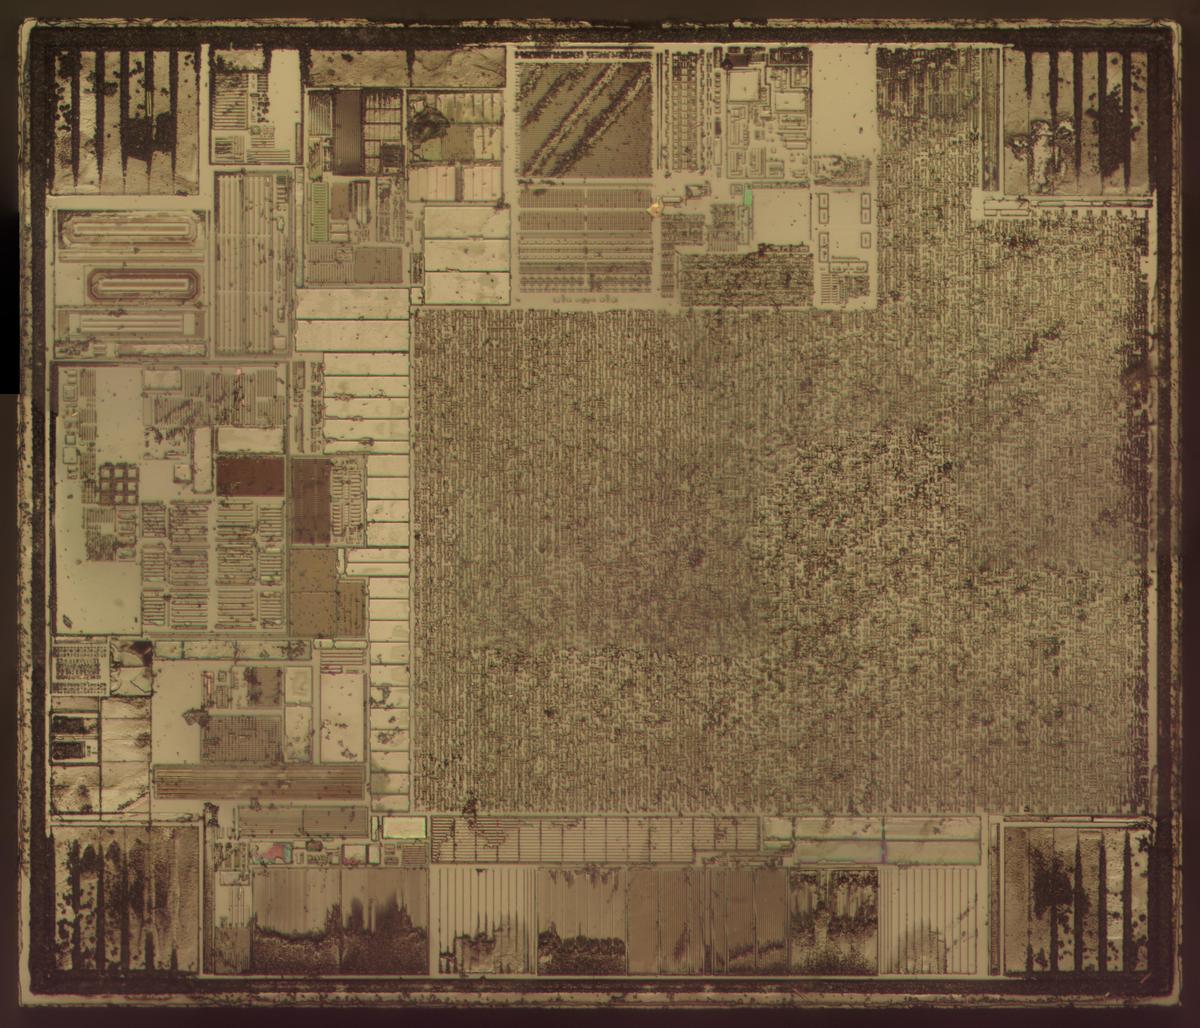 The die after stripping it down to the silicon.